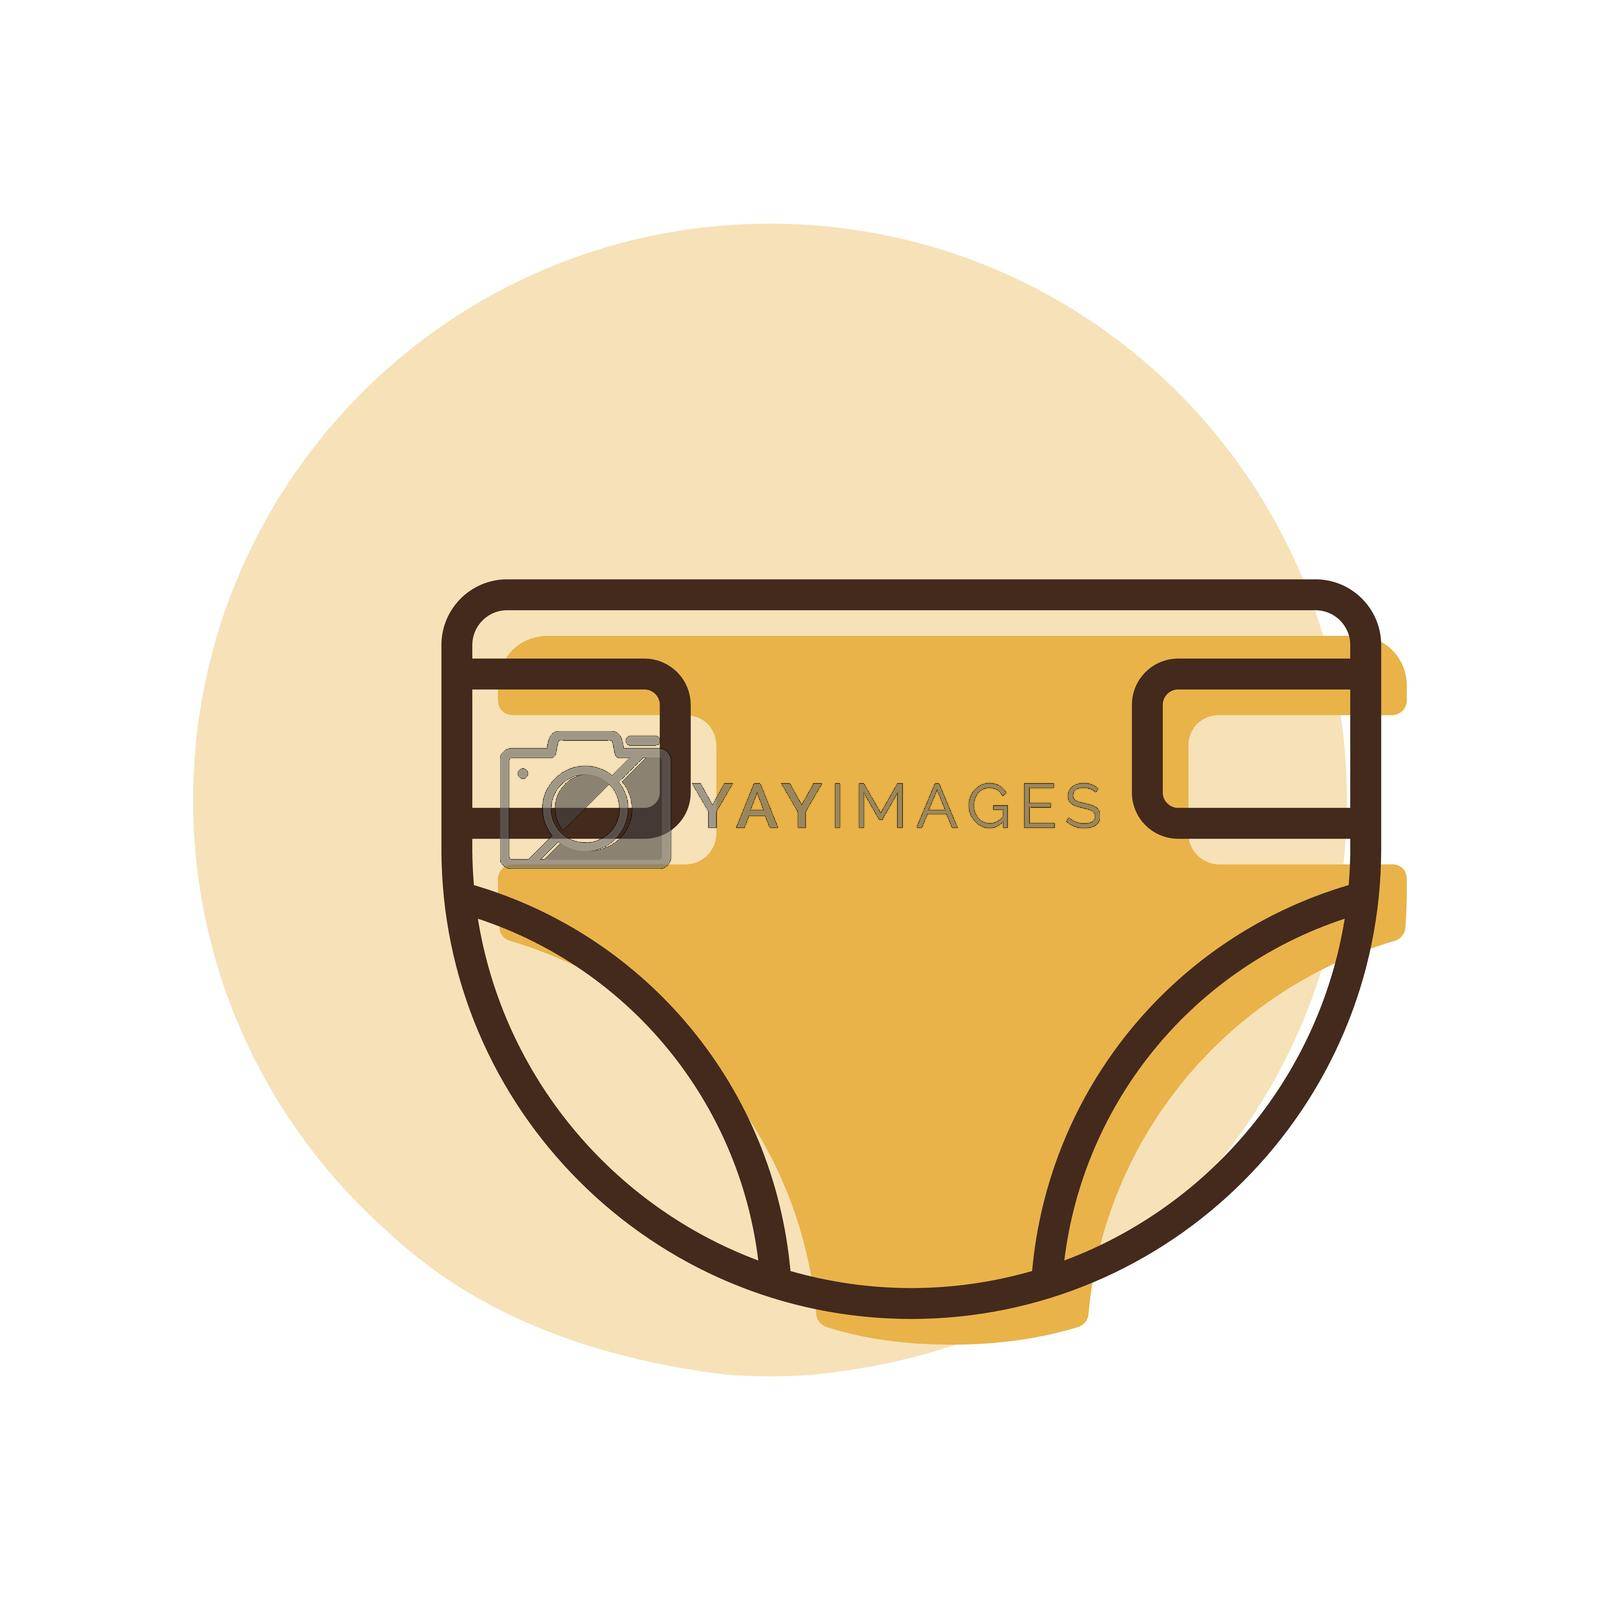 Diaper design vector isolated icon. Graph symbol for children and newborn babies web site and apps design, logo, app, UI